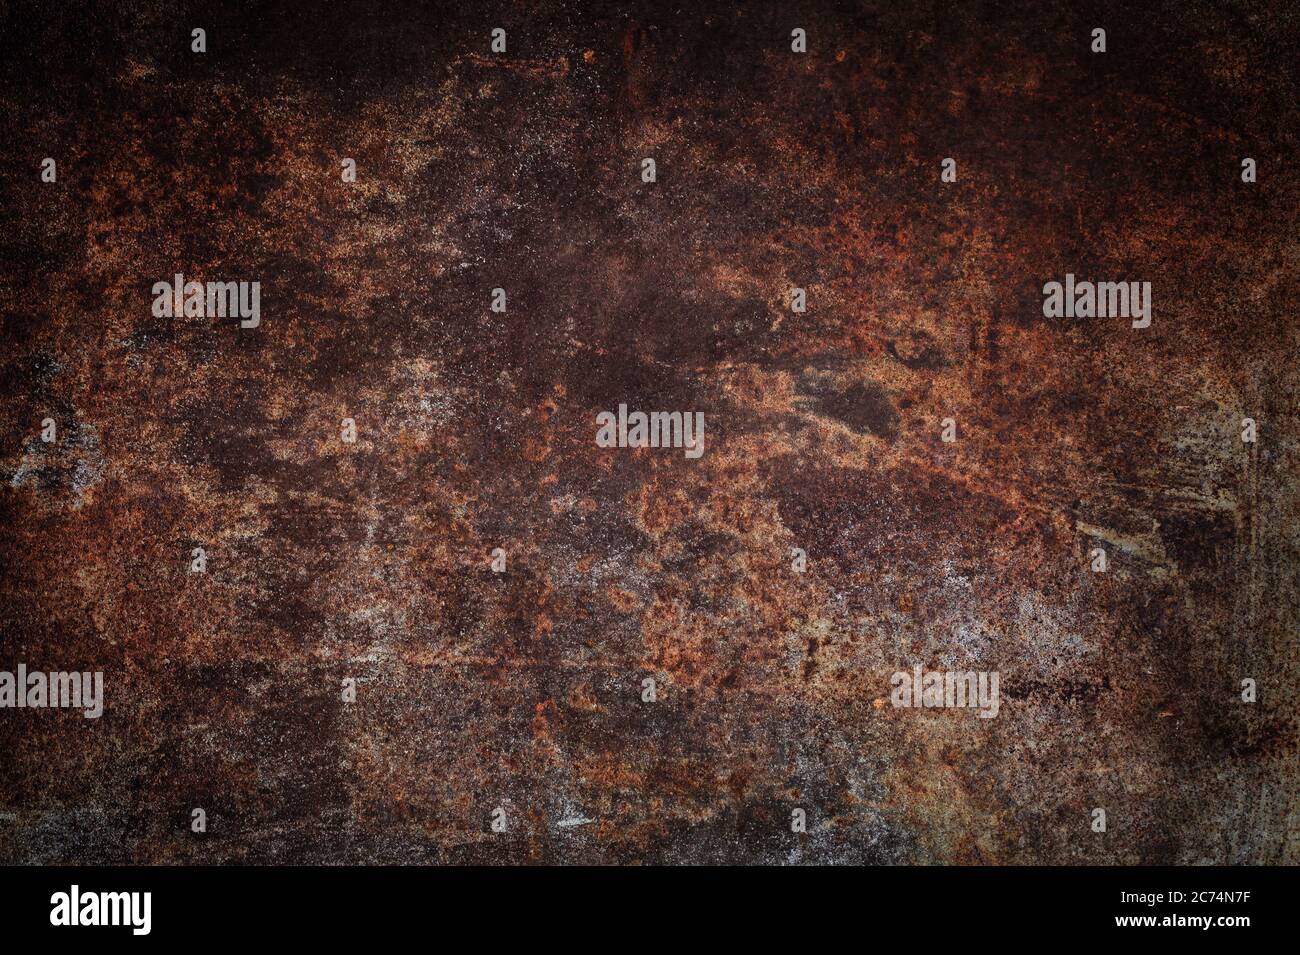 Abstract of a grunge rusted metal background with rust and oxidized texture. Stock Photo